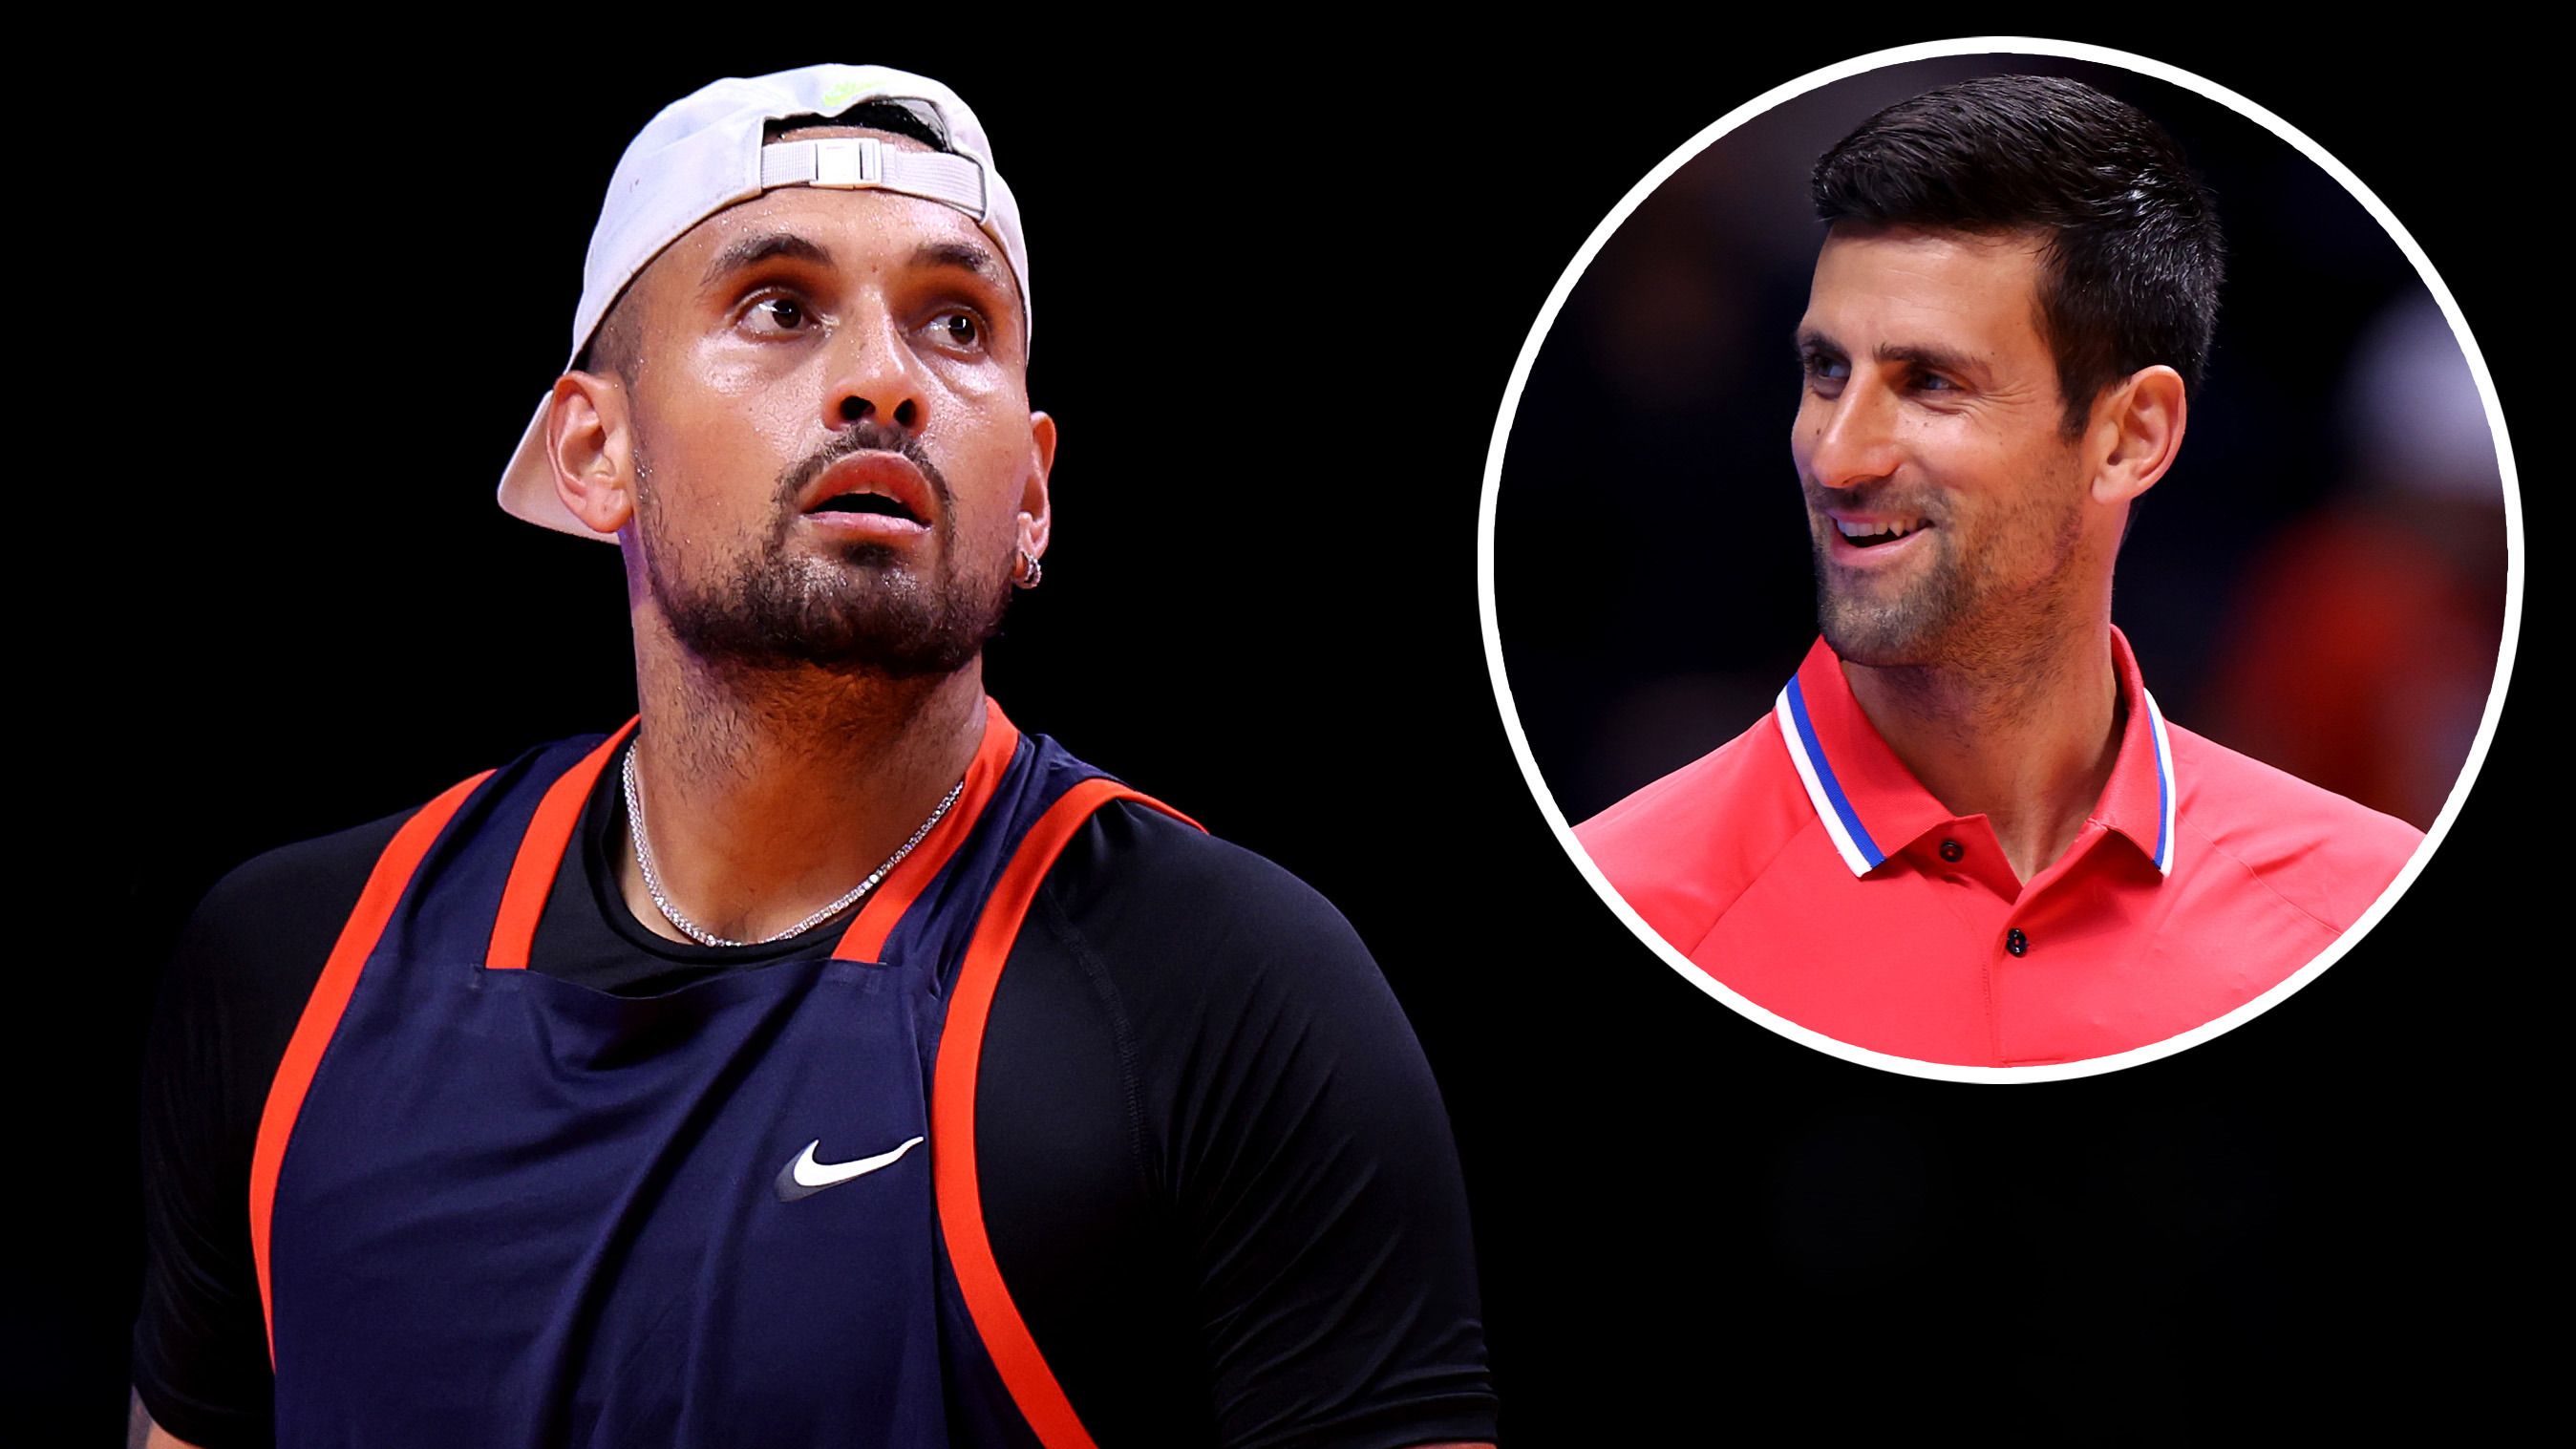 Nick Kyrgios played Grigor Dimitrov  after Novak Djokovic pulled out at the last minute.